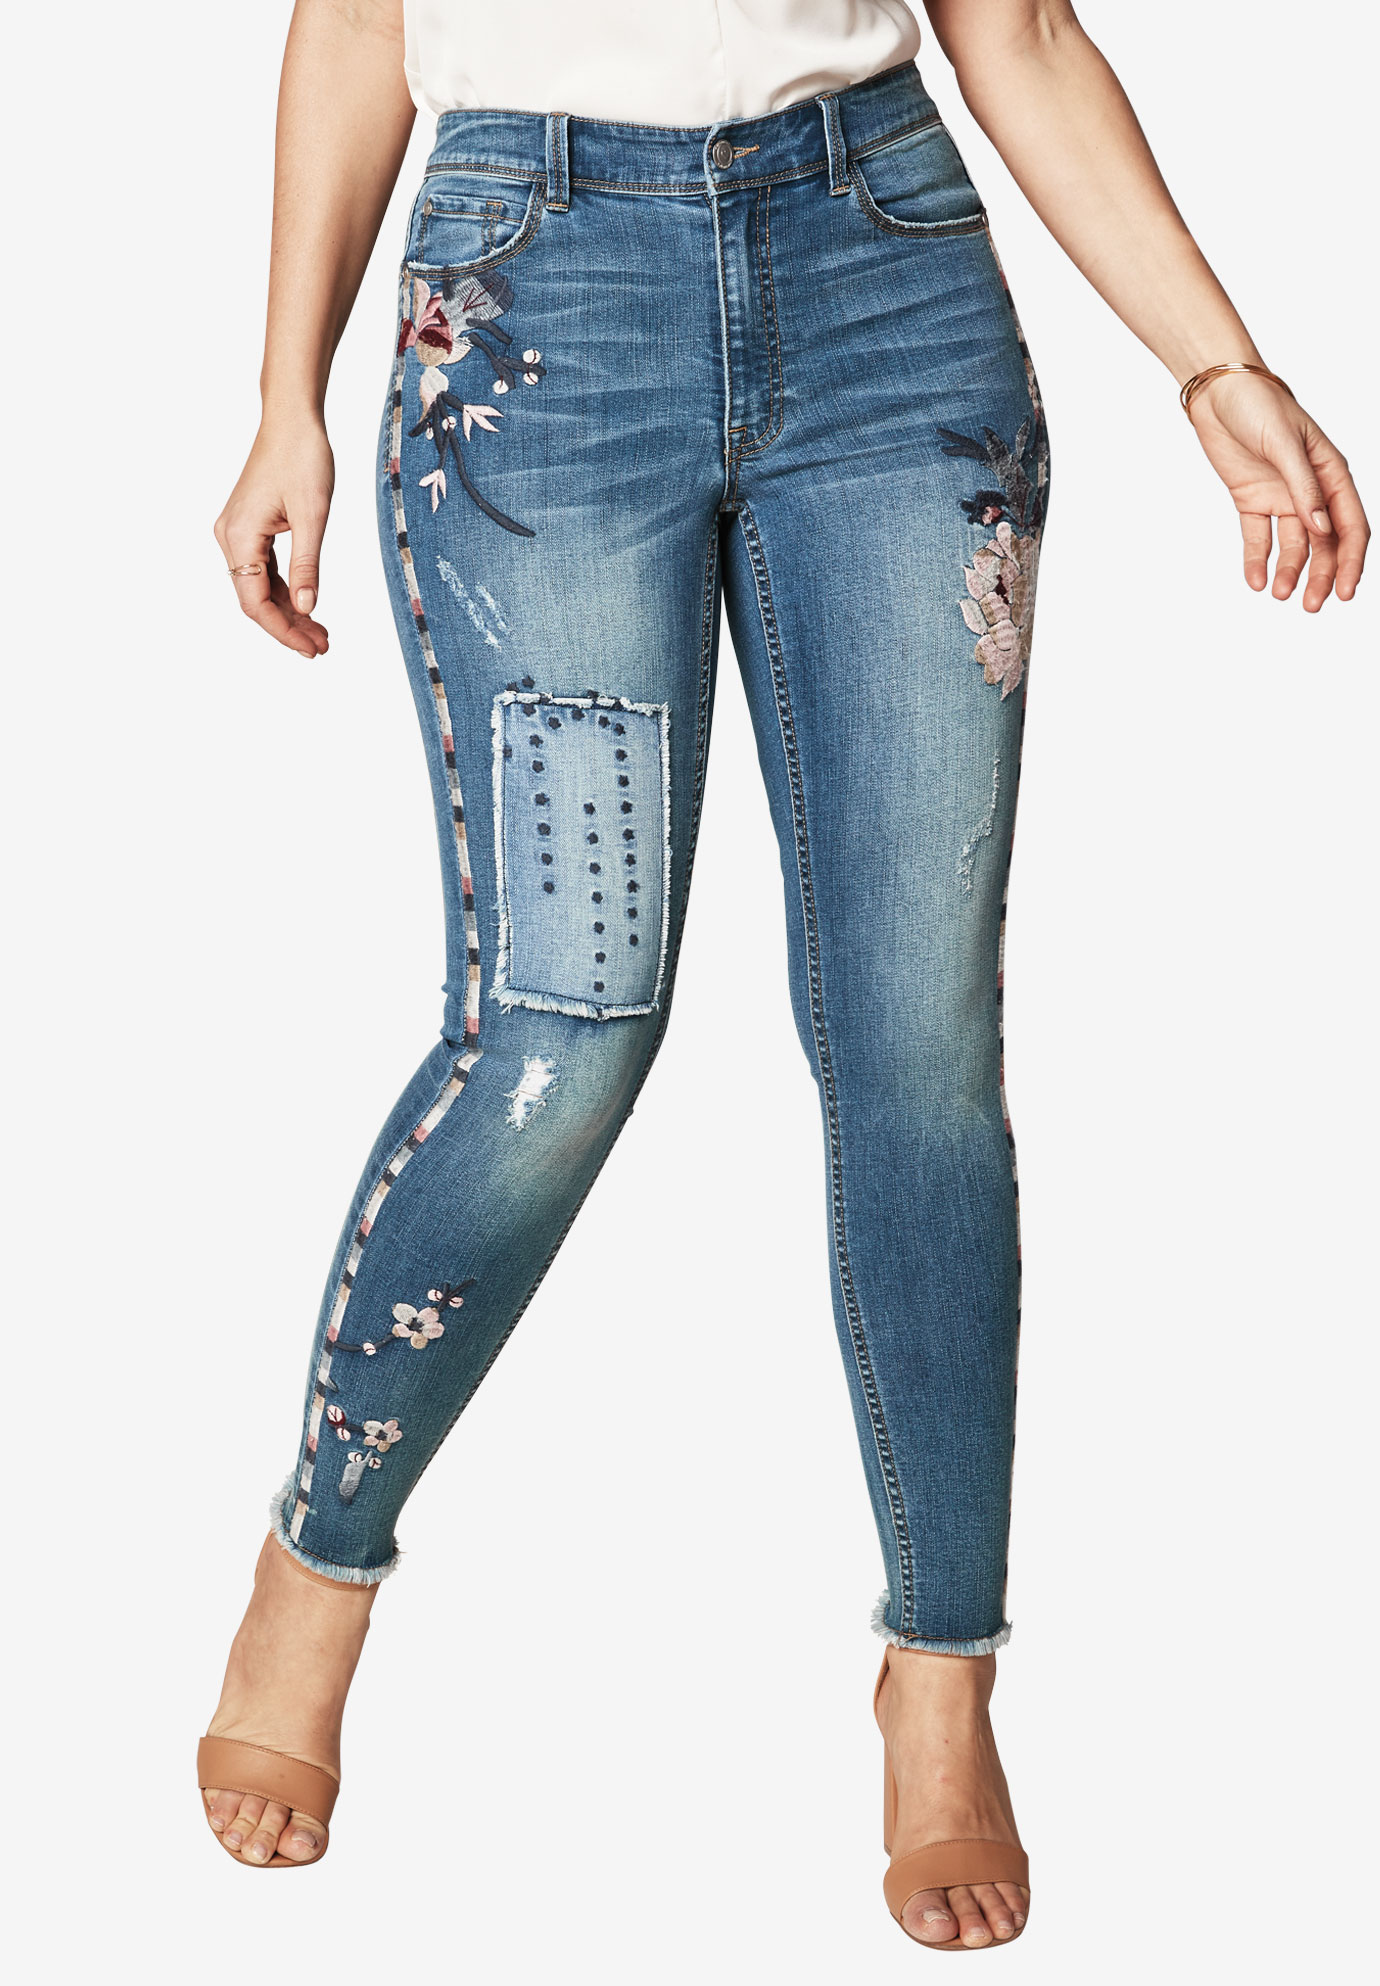 Embroidered Skinny Jeans By Denim 24 7® Plus Size Jeans And Pants Roaman S